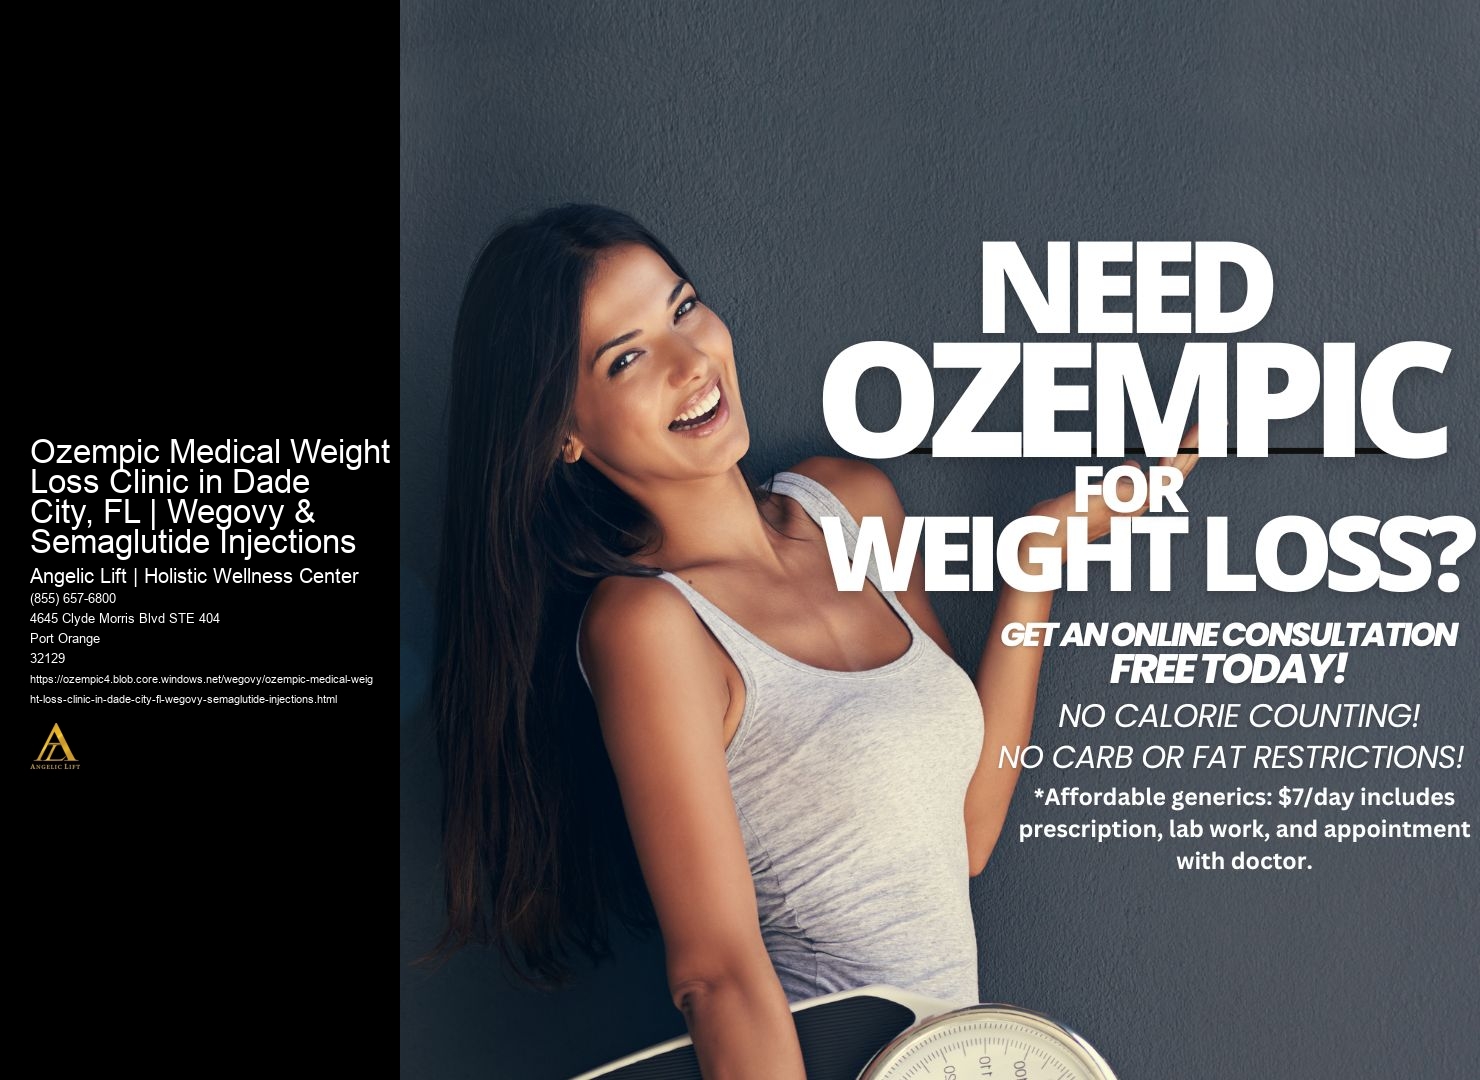 Ozempic Medical Weight Loss Clinic in Dade City, FL | Wegovy & Semaglutide Injections